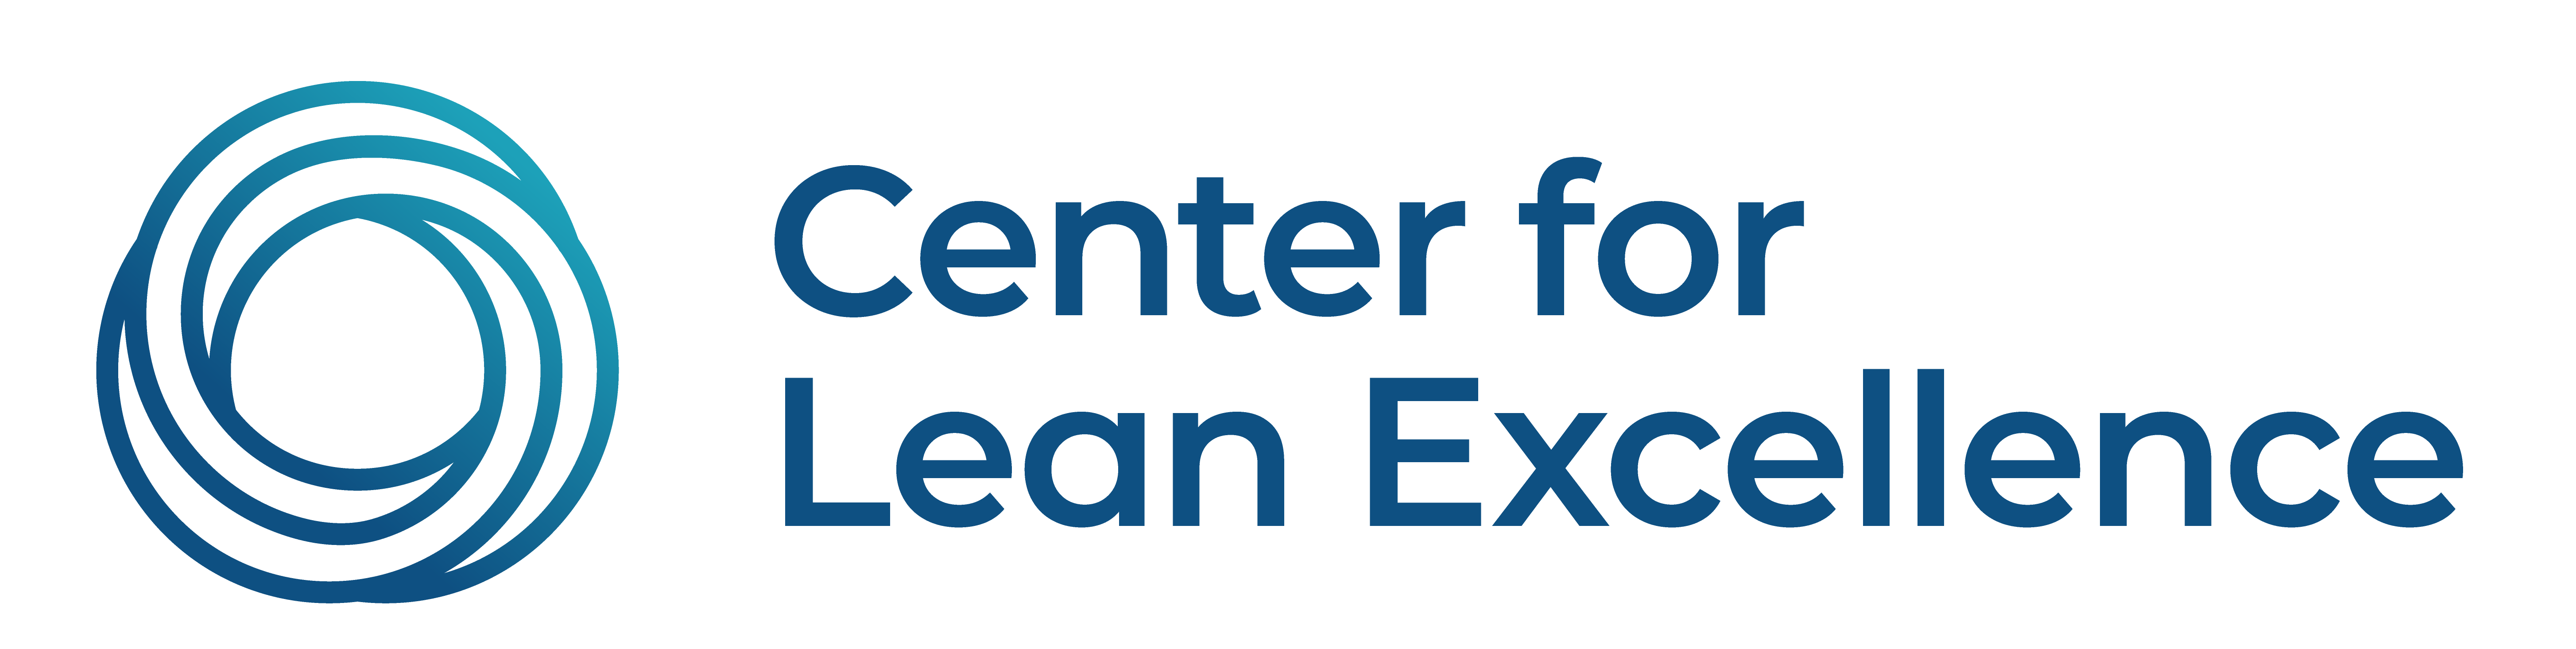 Center for Lean Excellence